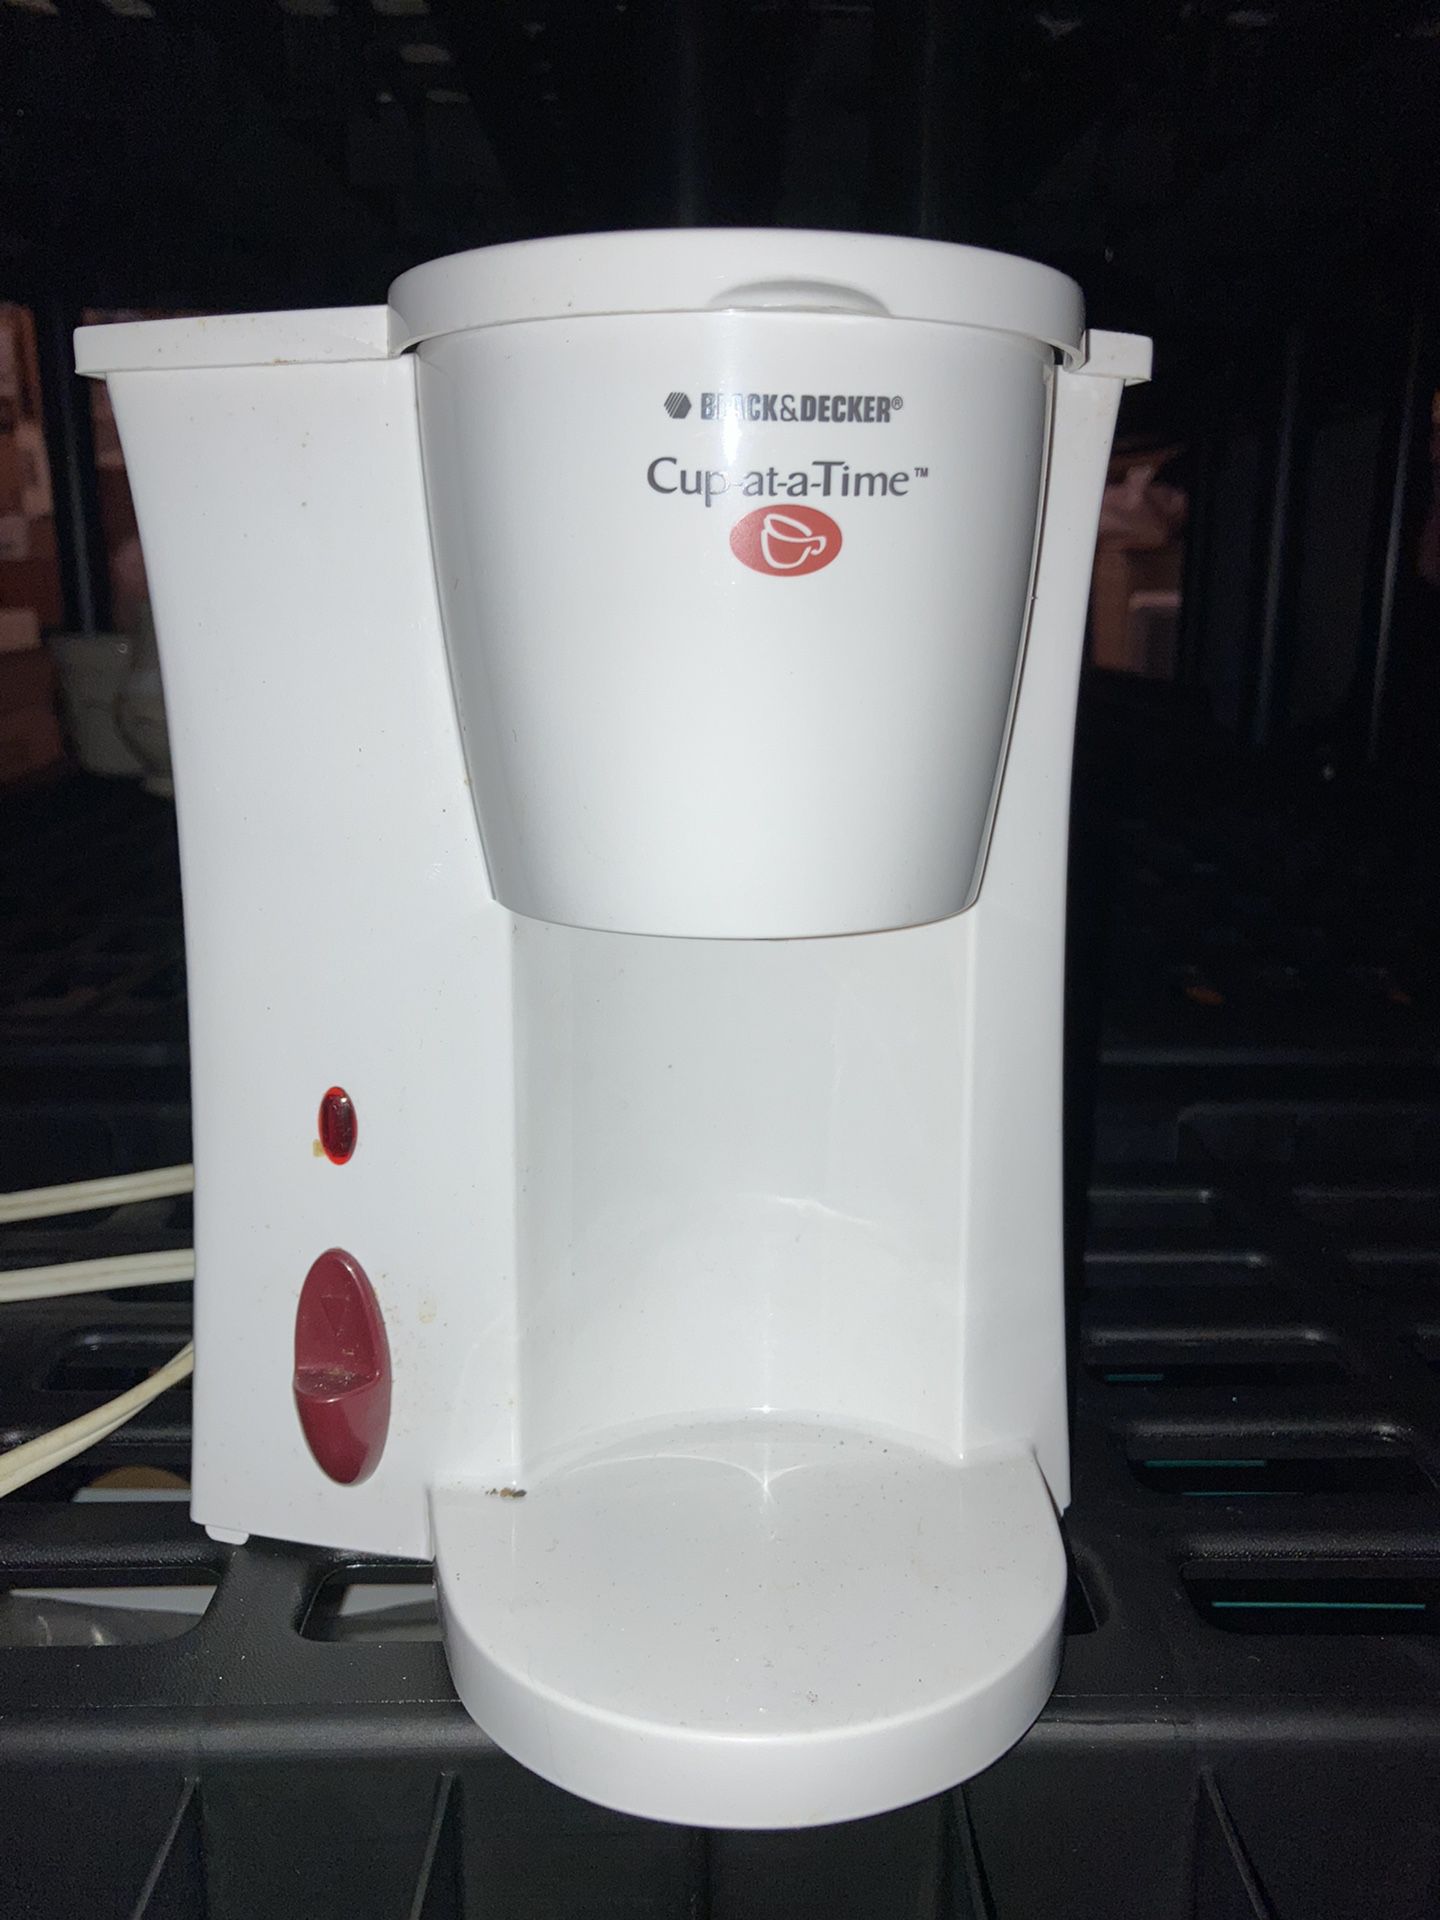 Black & Decker Cup at a Time Coffee Maker